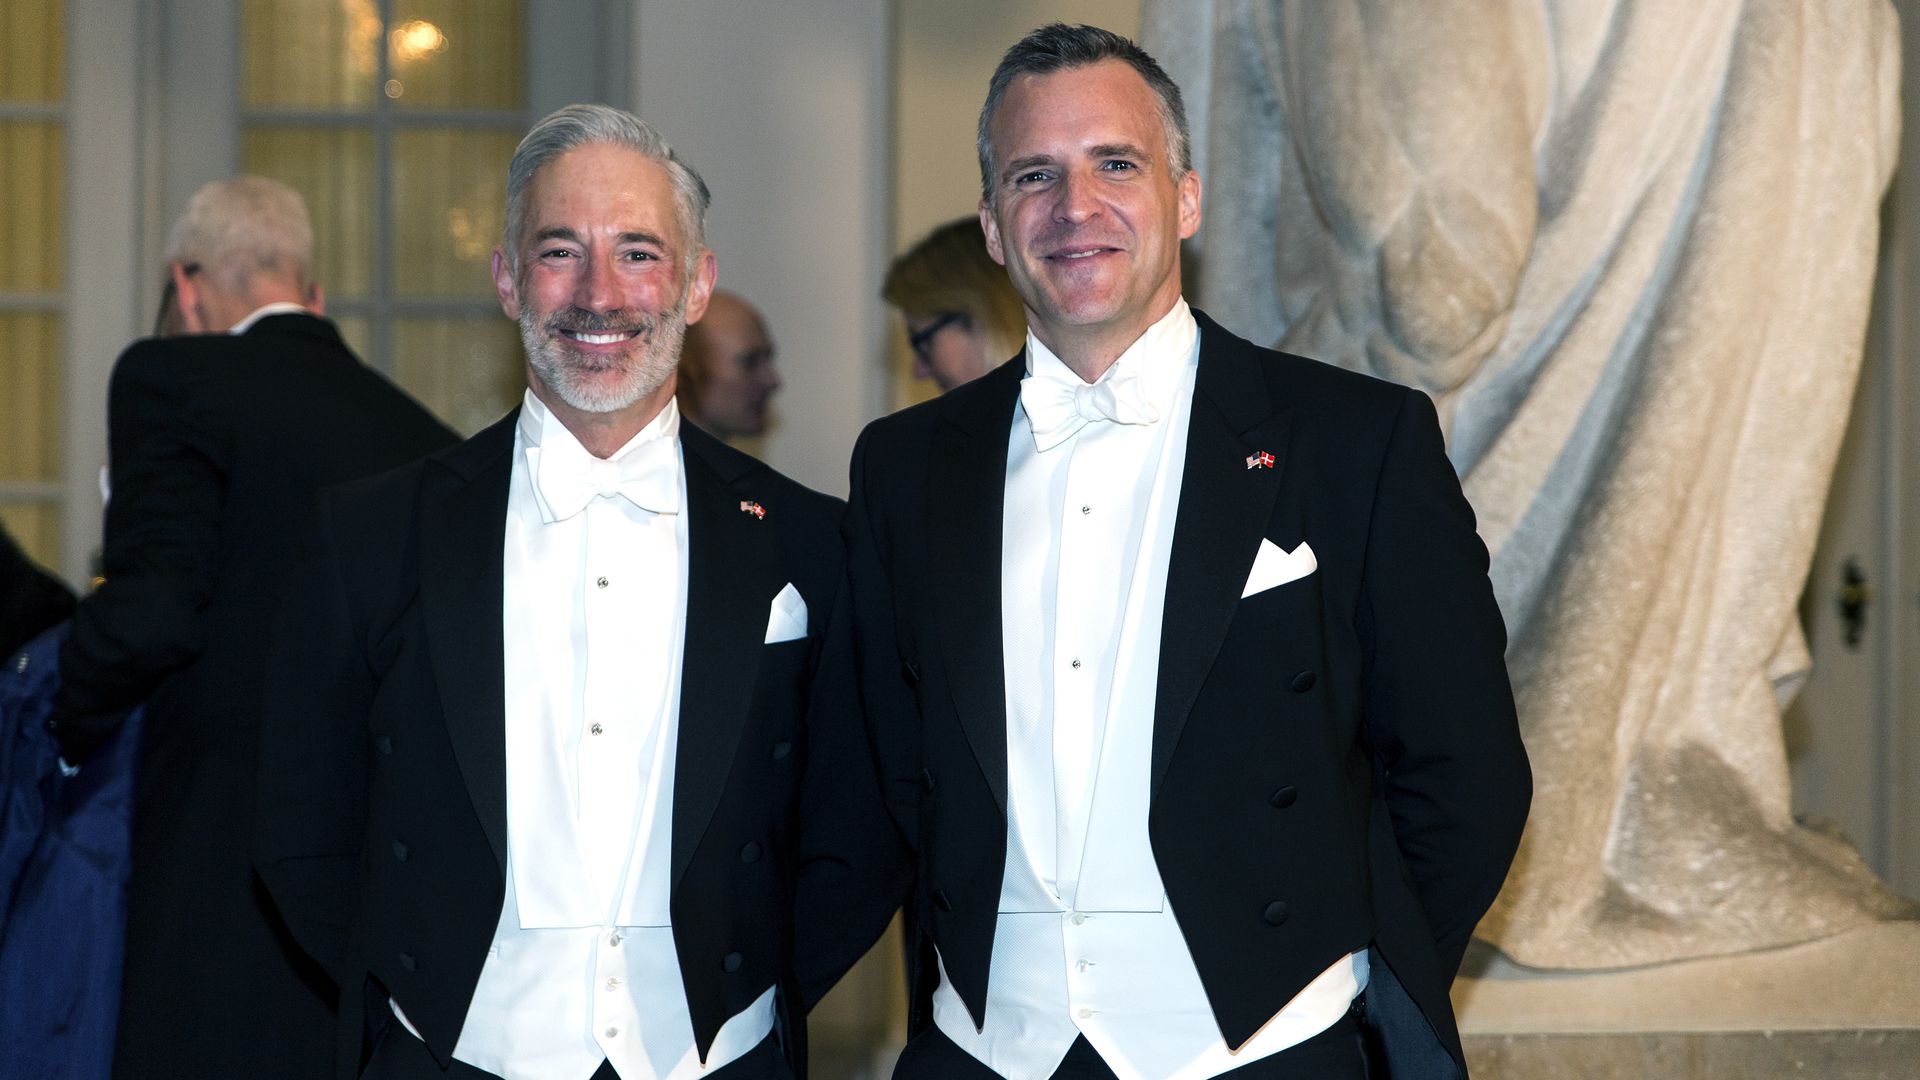 Rufus Gifford is seen with his spouse, Stephen Devincent, during a formal reception in Denmark.